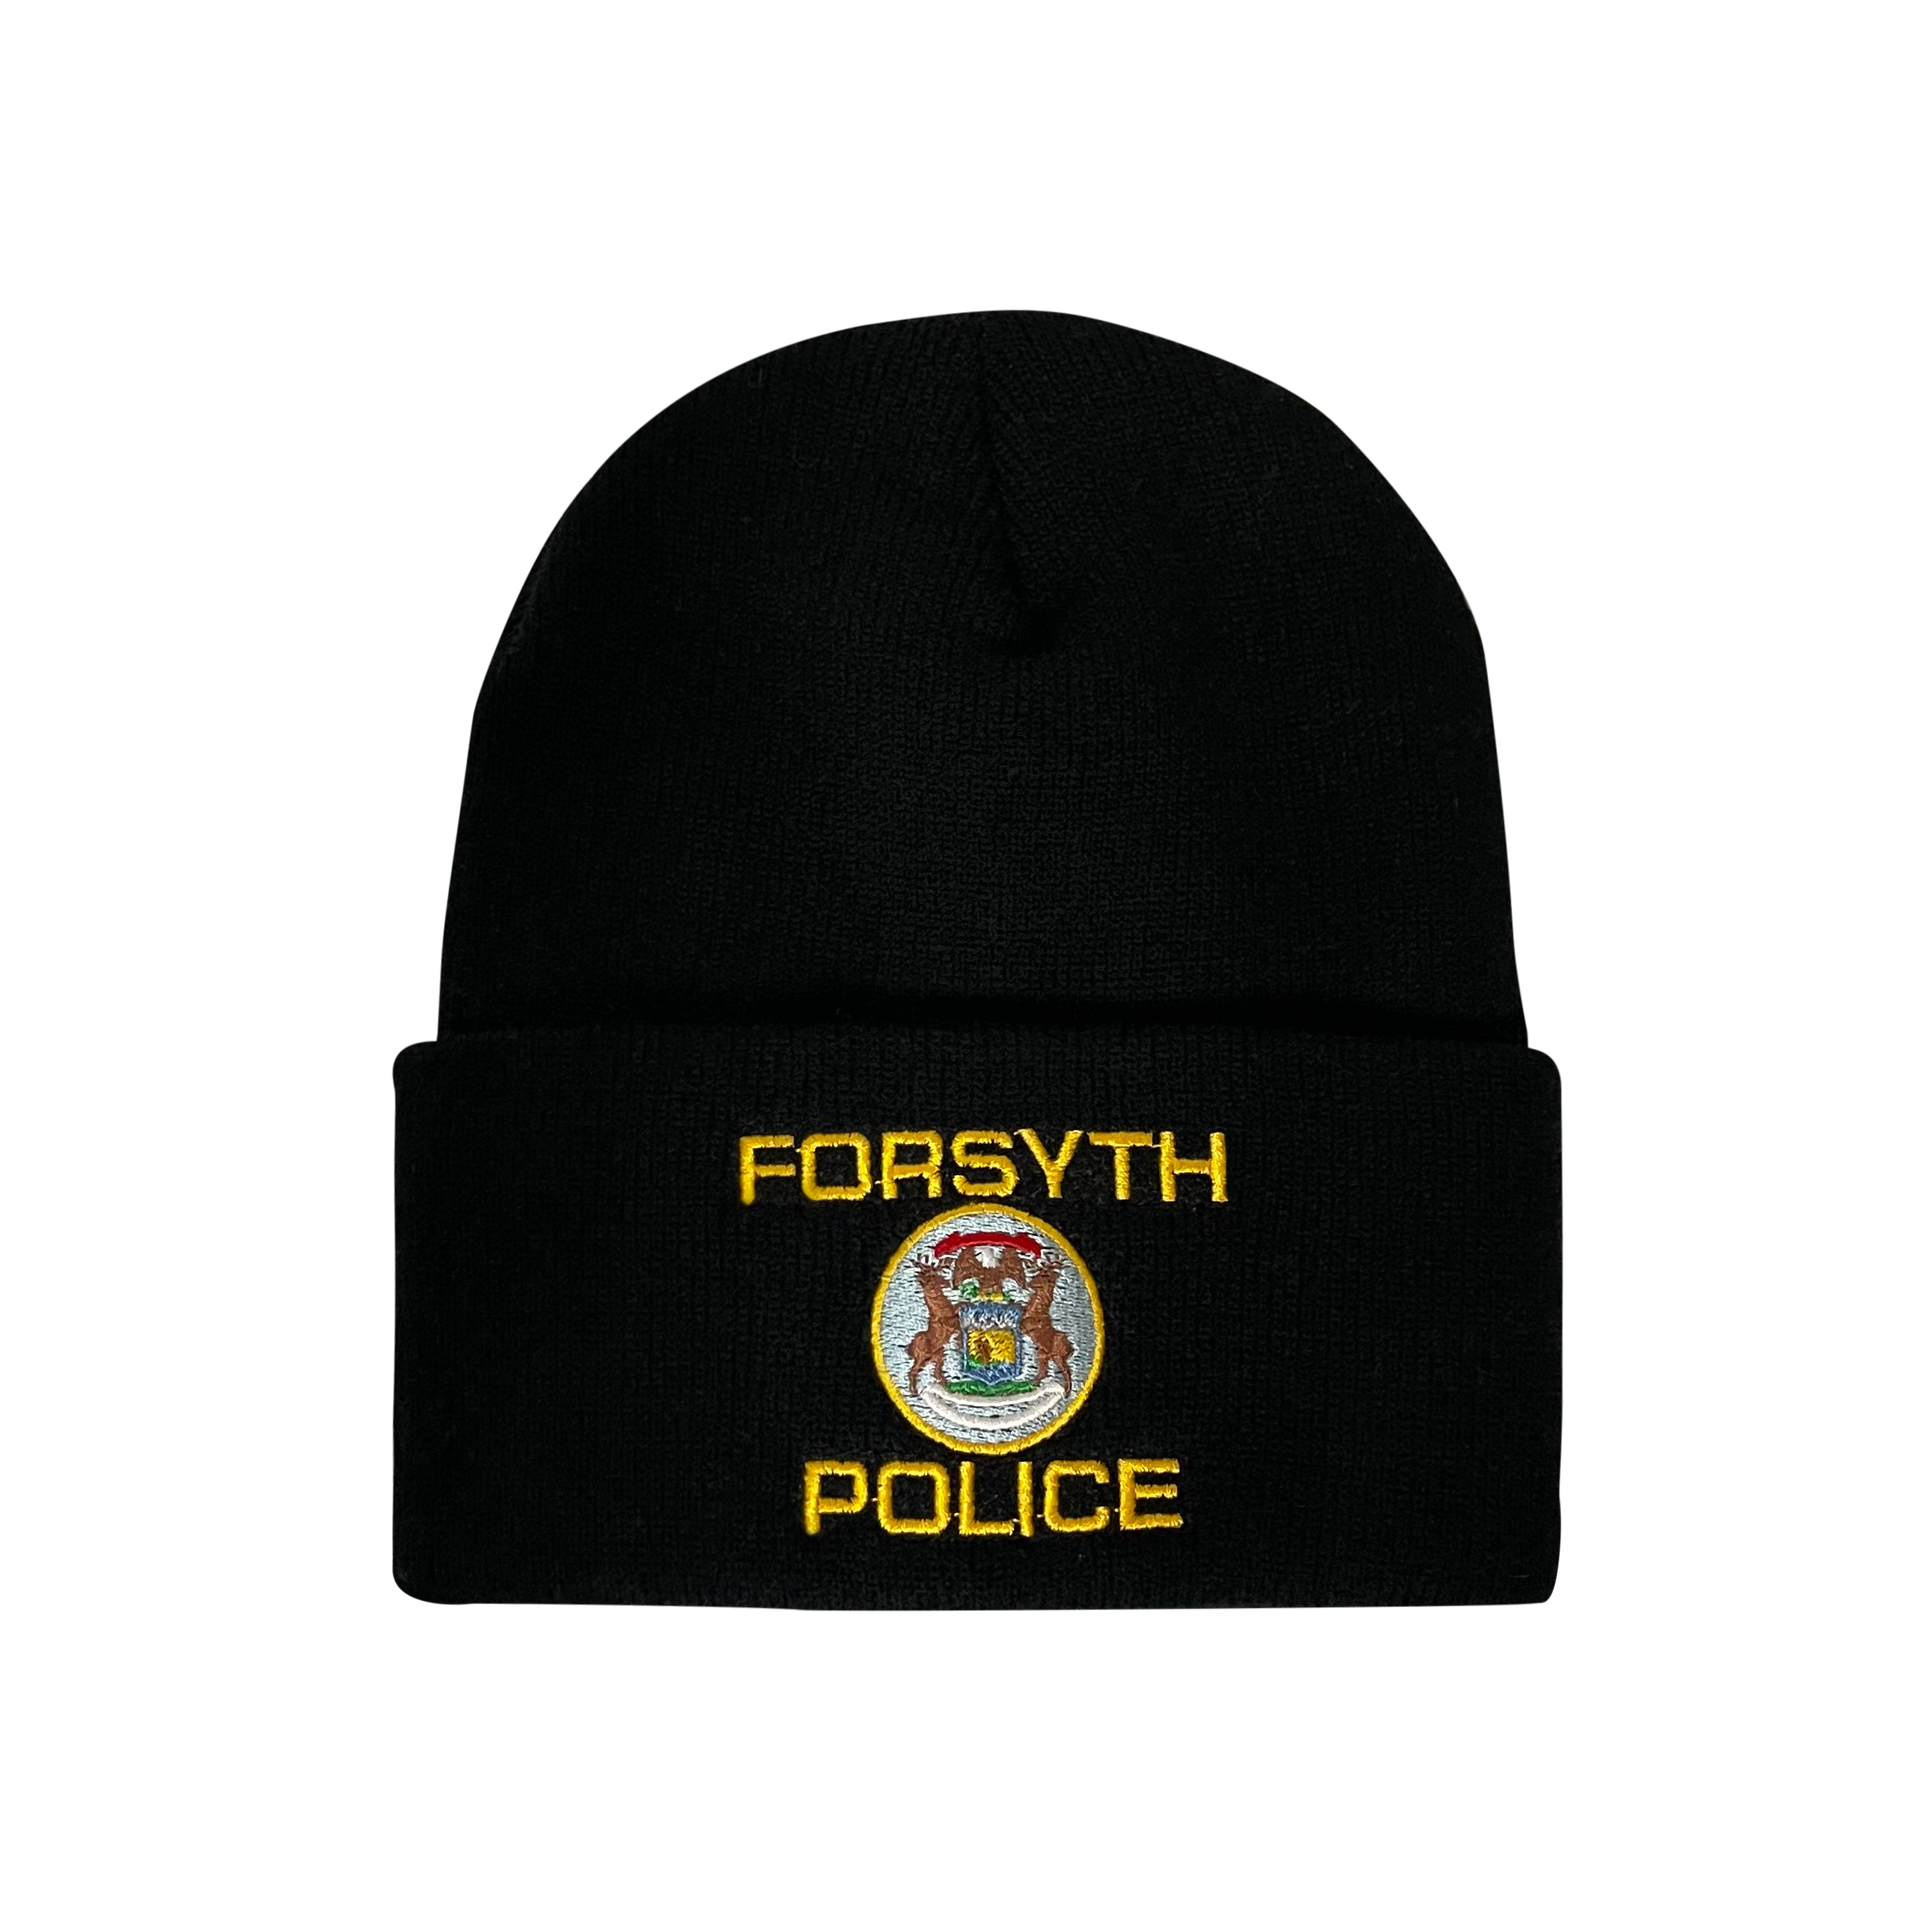 A black beanie with forsyth police embroidered on it